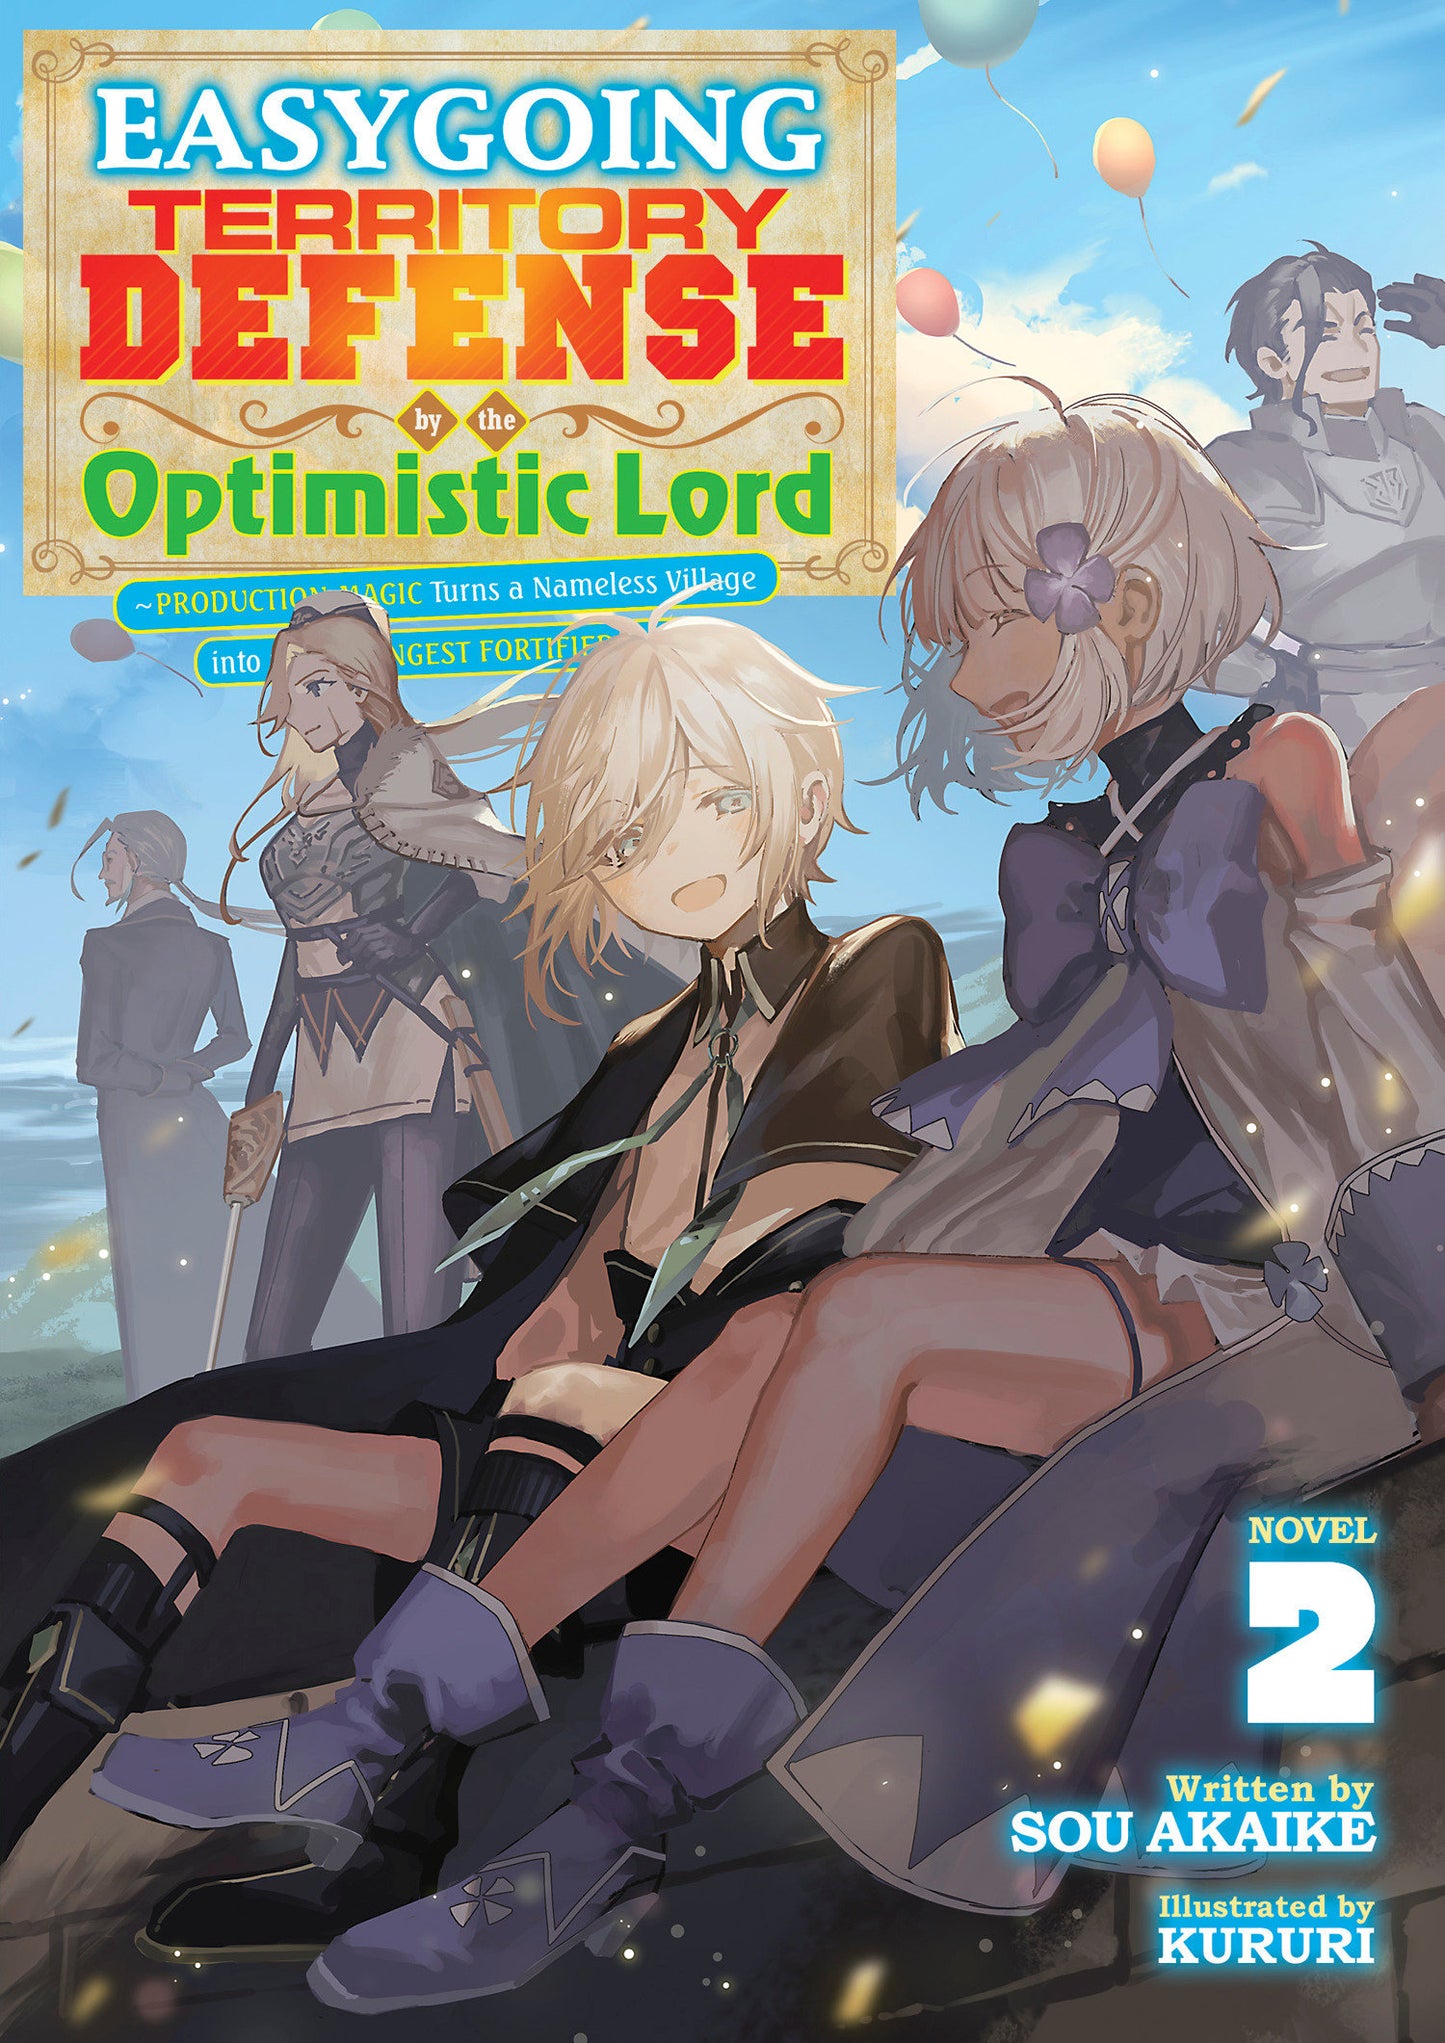 Easygoing Territory Defense by the Optimistic Lord: Production Magic Turns a Nameless Village into the Strongest Fortified City (Light Novel) Vol. 2 - Release Date:  5/14/24